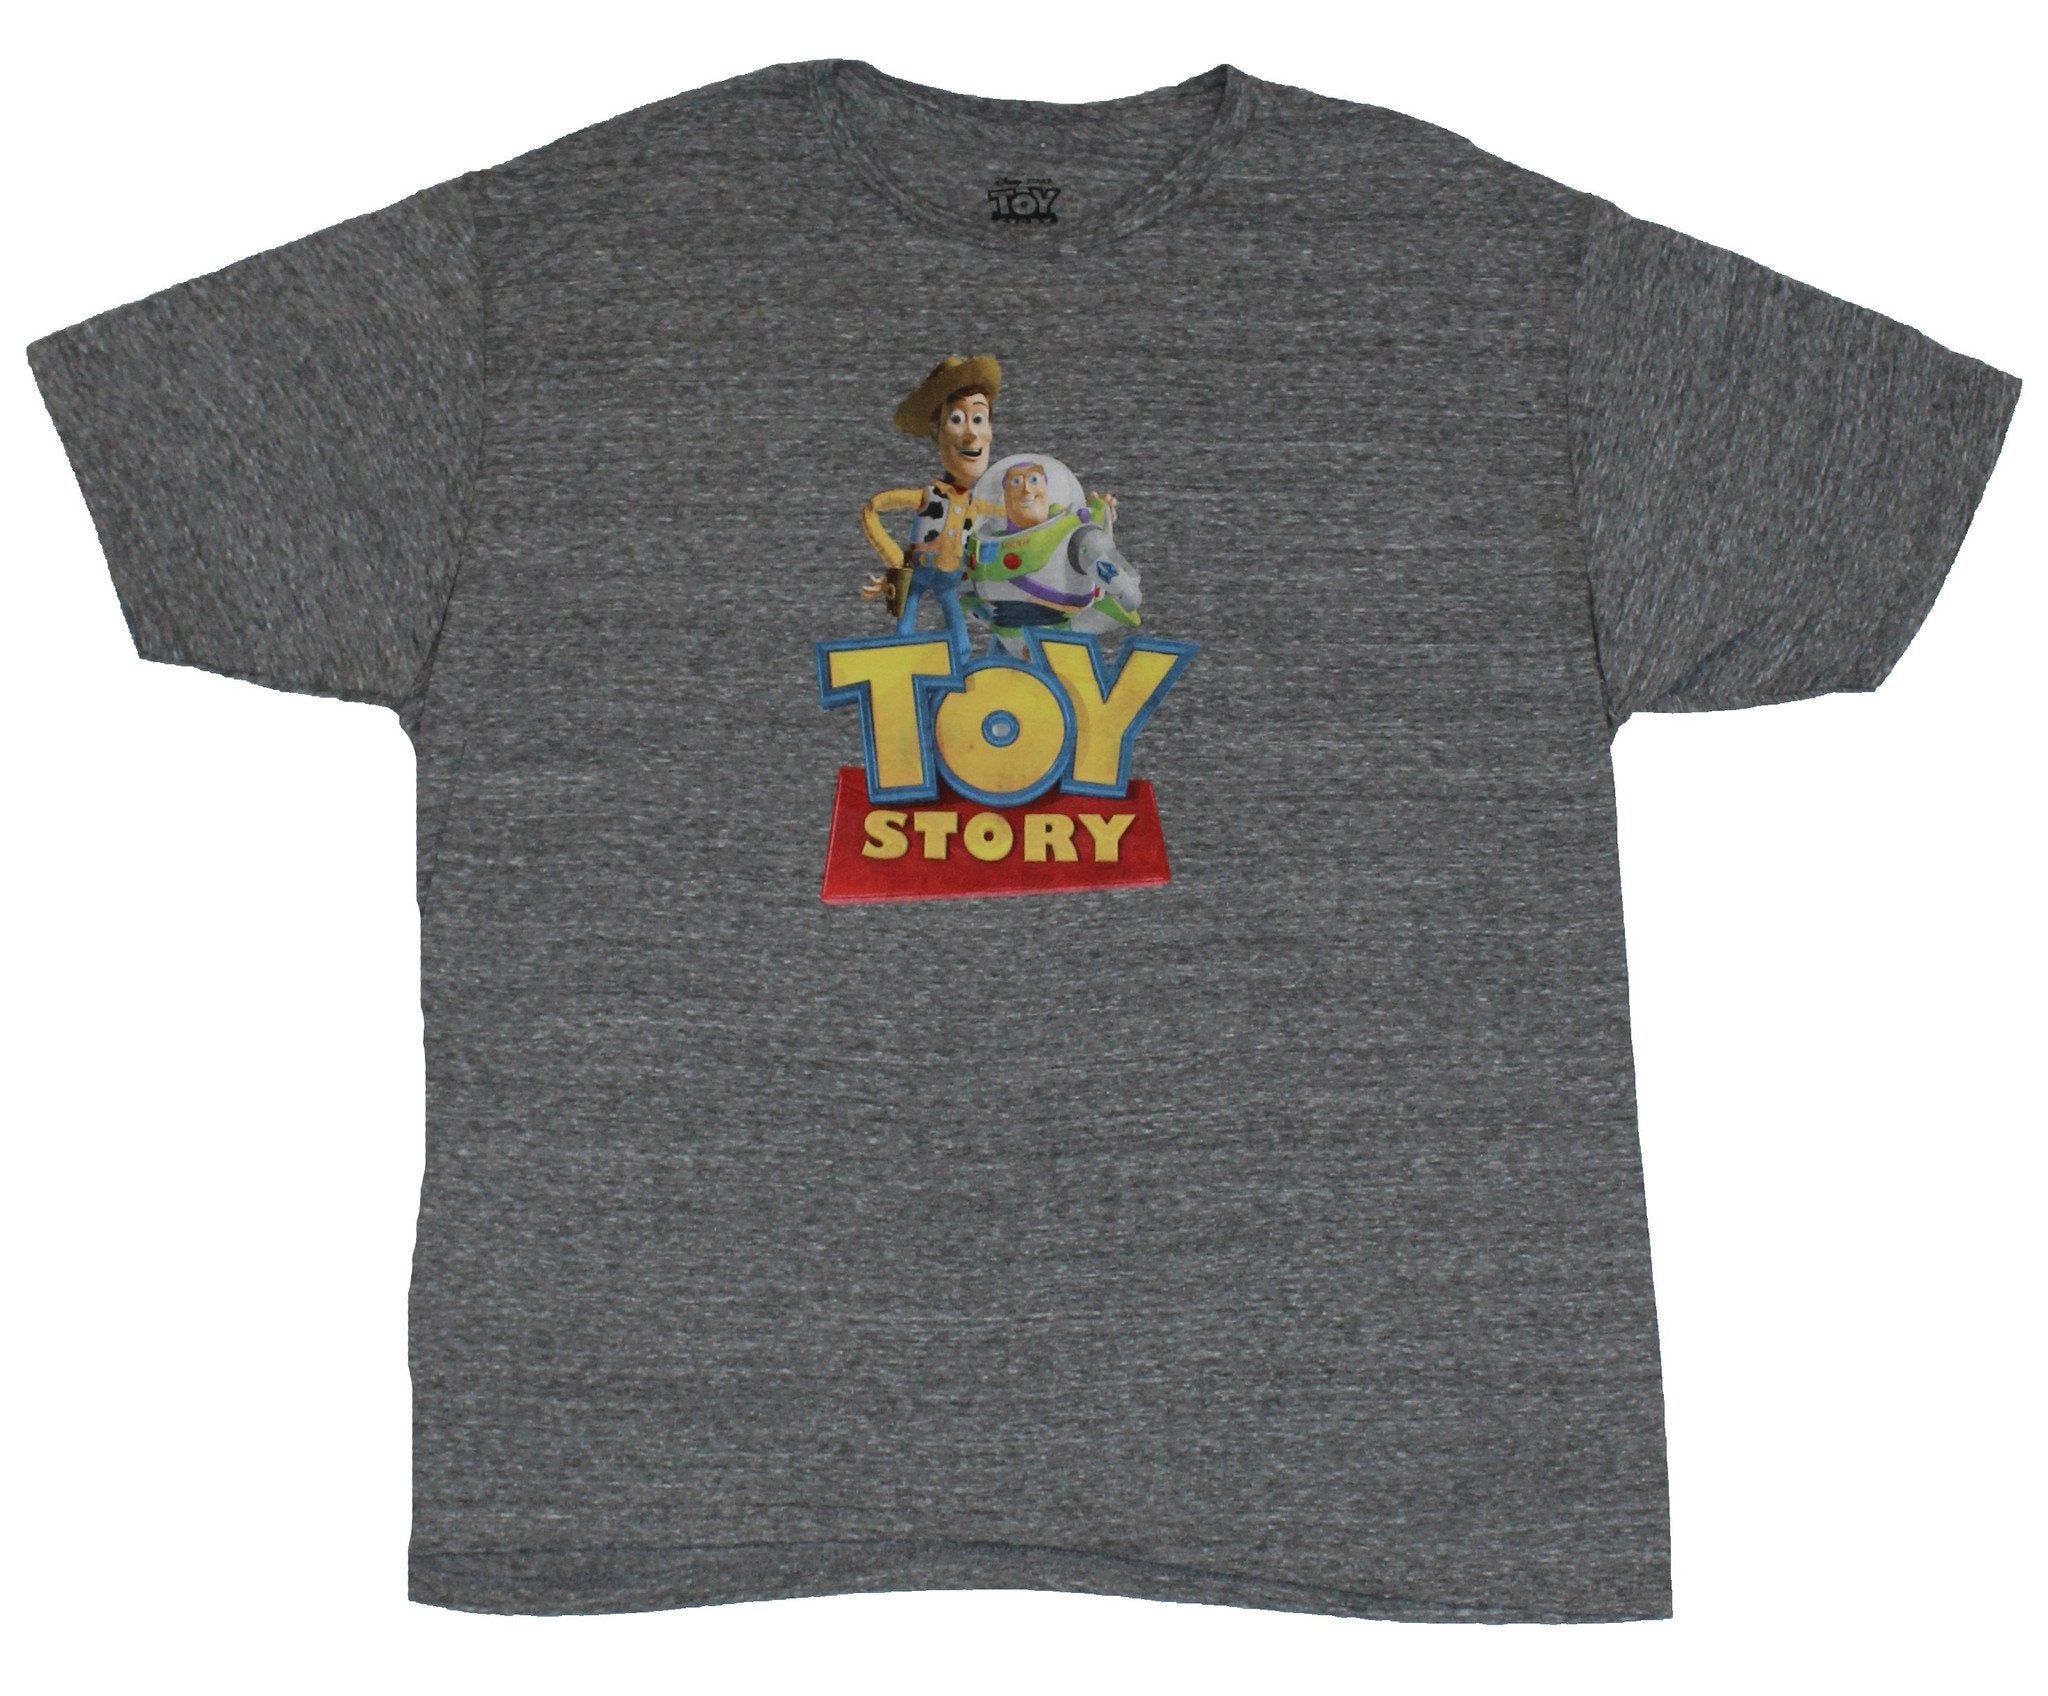 Toy Story Mens T-Shirt - Buzz and Woody Over Logo Image